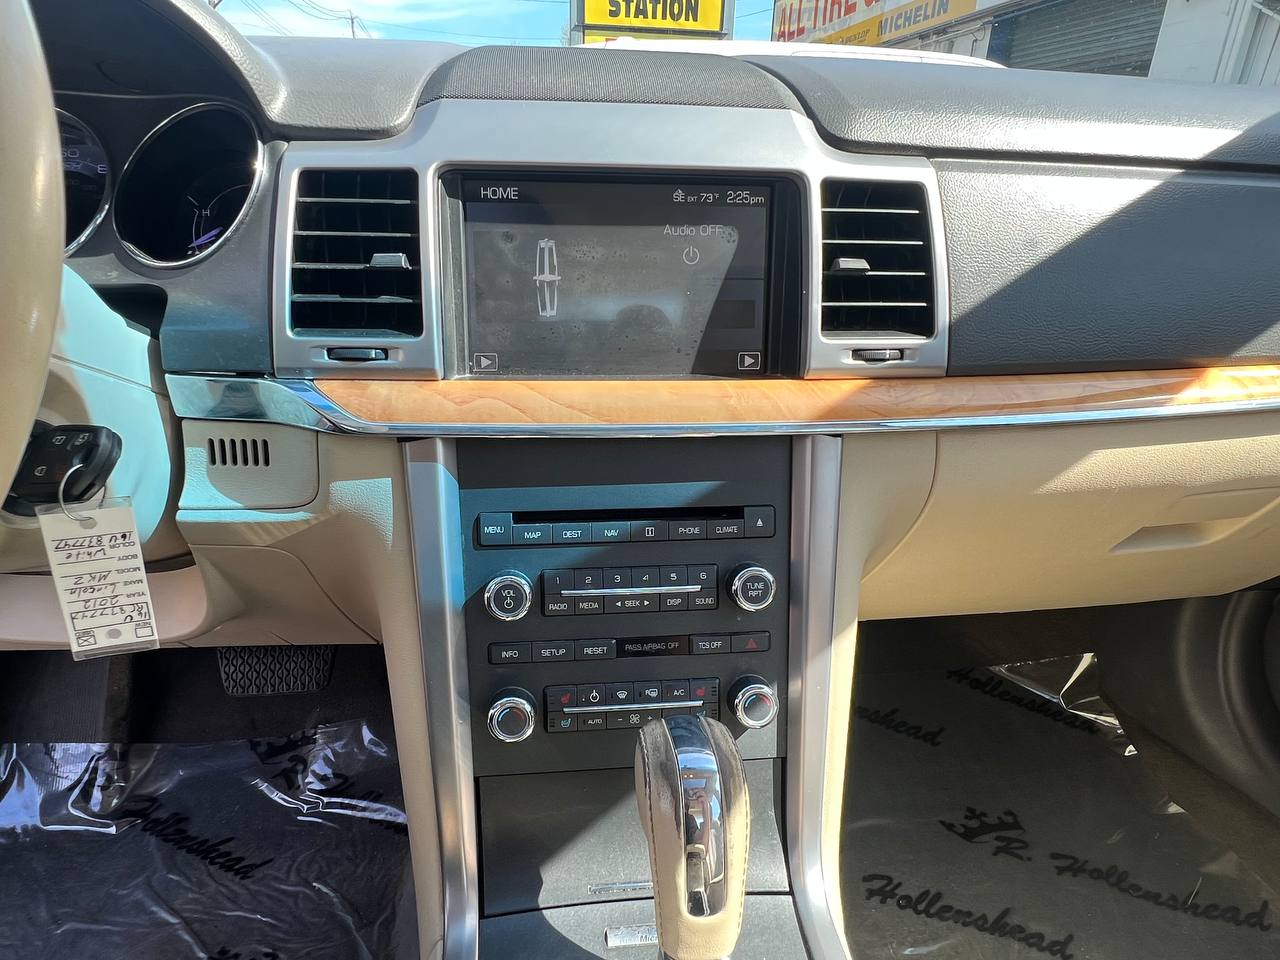 Used - Lincoln MKZ Base AWD Sedan for sale in Staten Island NY